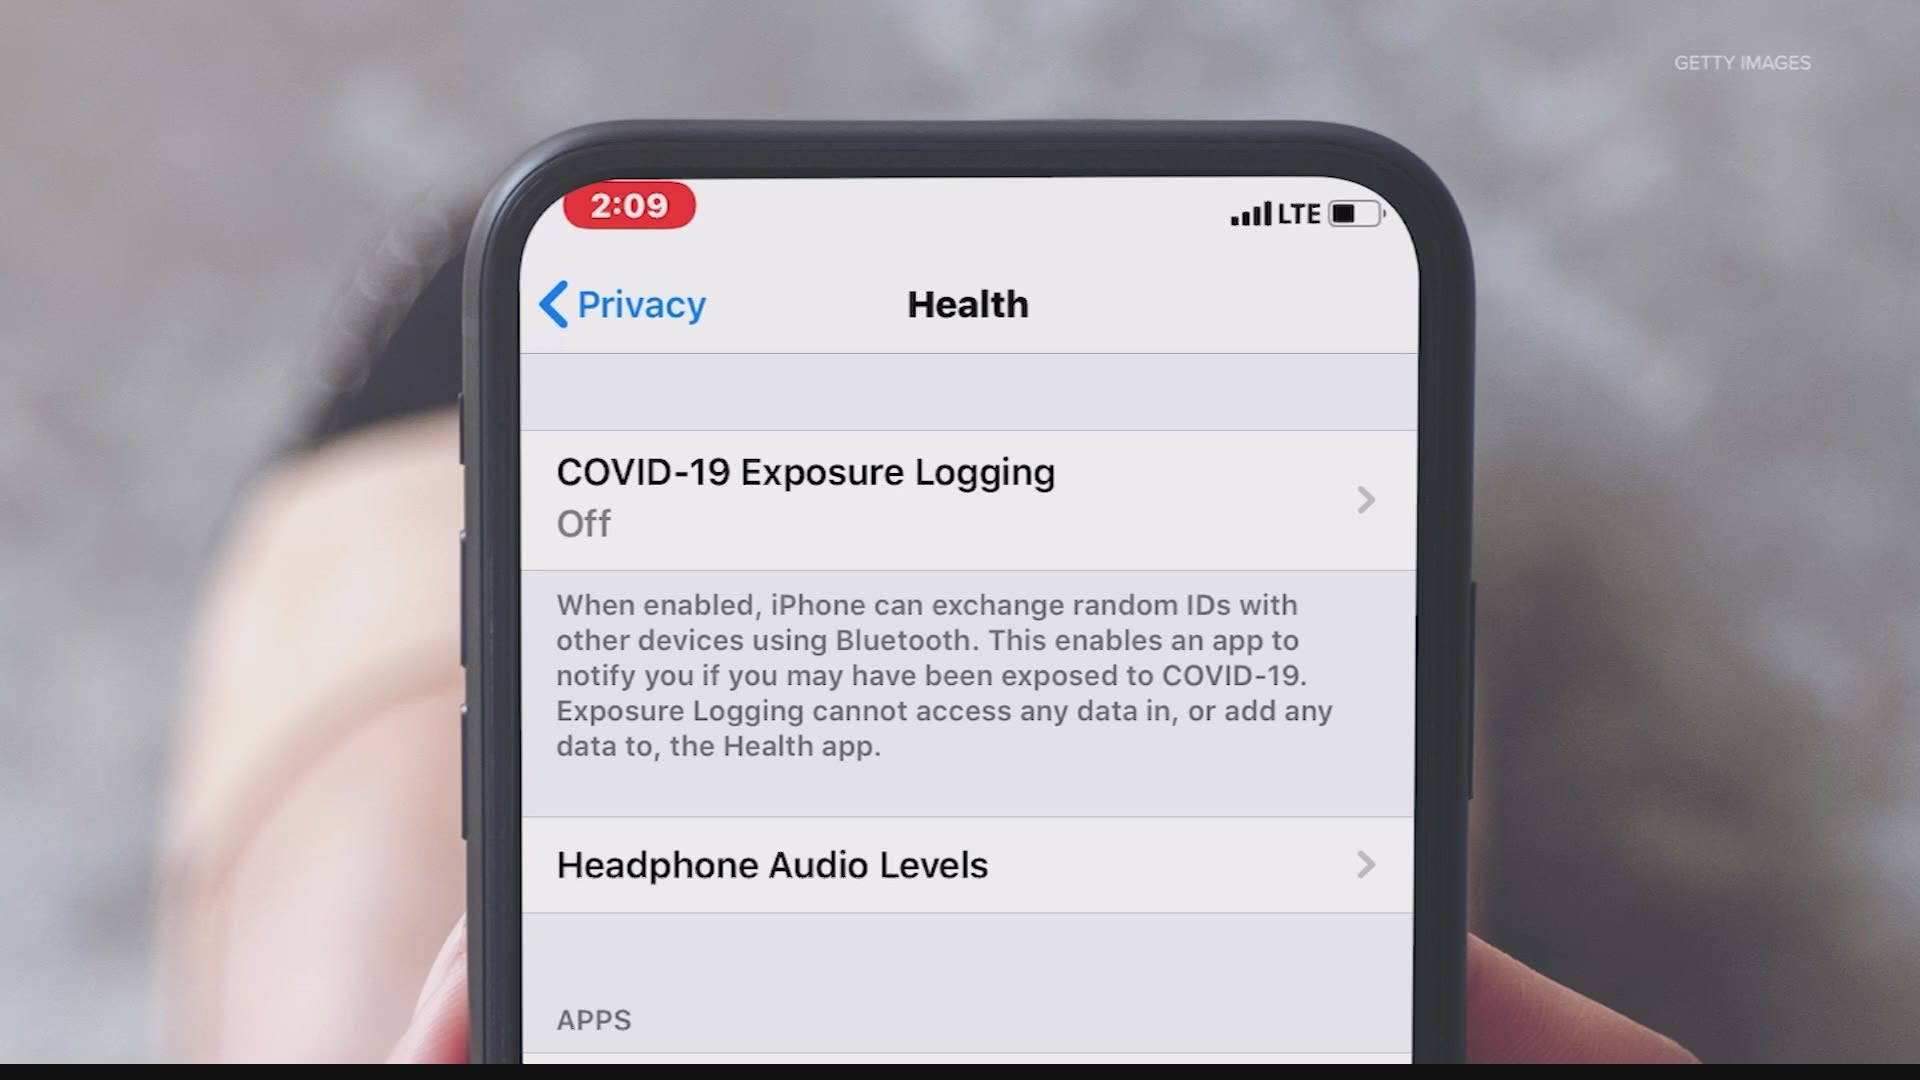 Apple and Google are now trying to put contact tracing for COVID-19 at your fingertips but it comes with concerns about privacy.